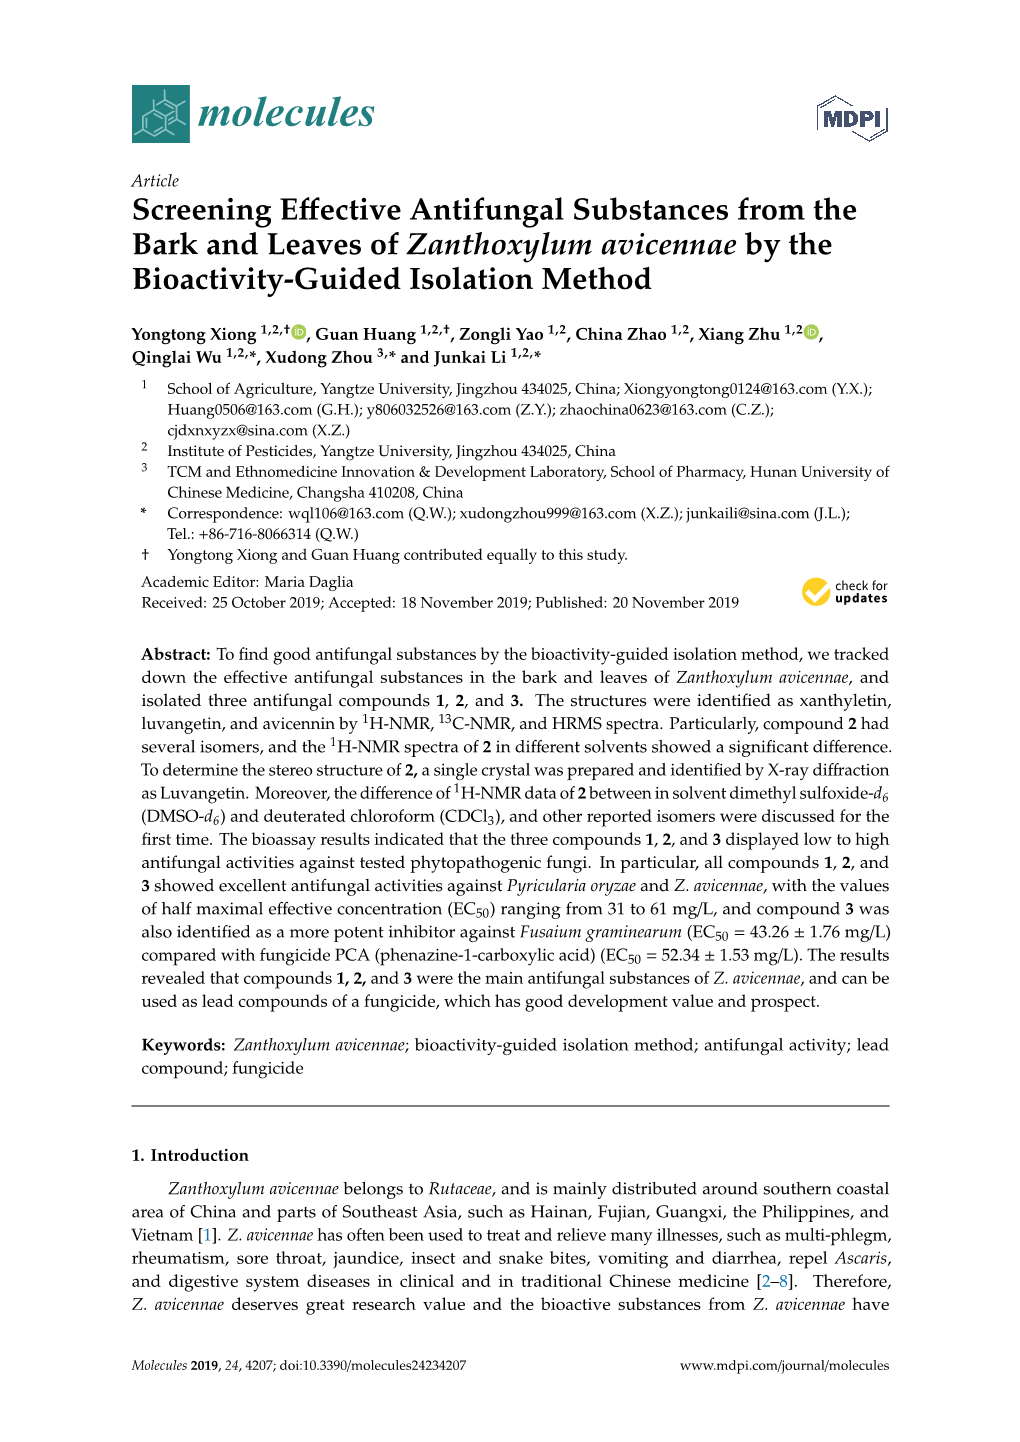 Screening Effective Antifungal Substances from the Bark and Leaves of Zanthoxylum Avicennae by the Bioactivity-Guided Isolation Method